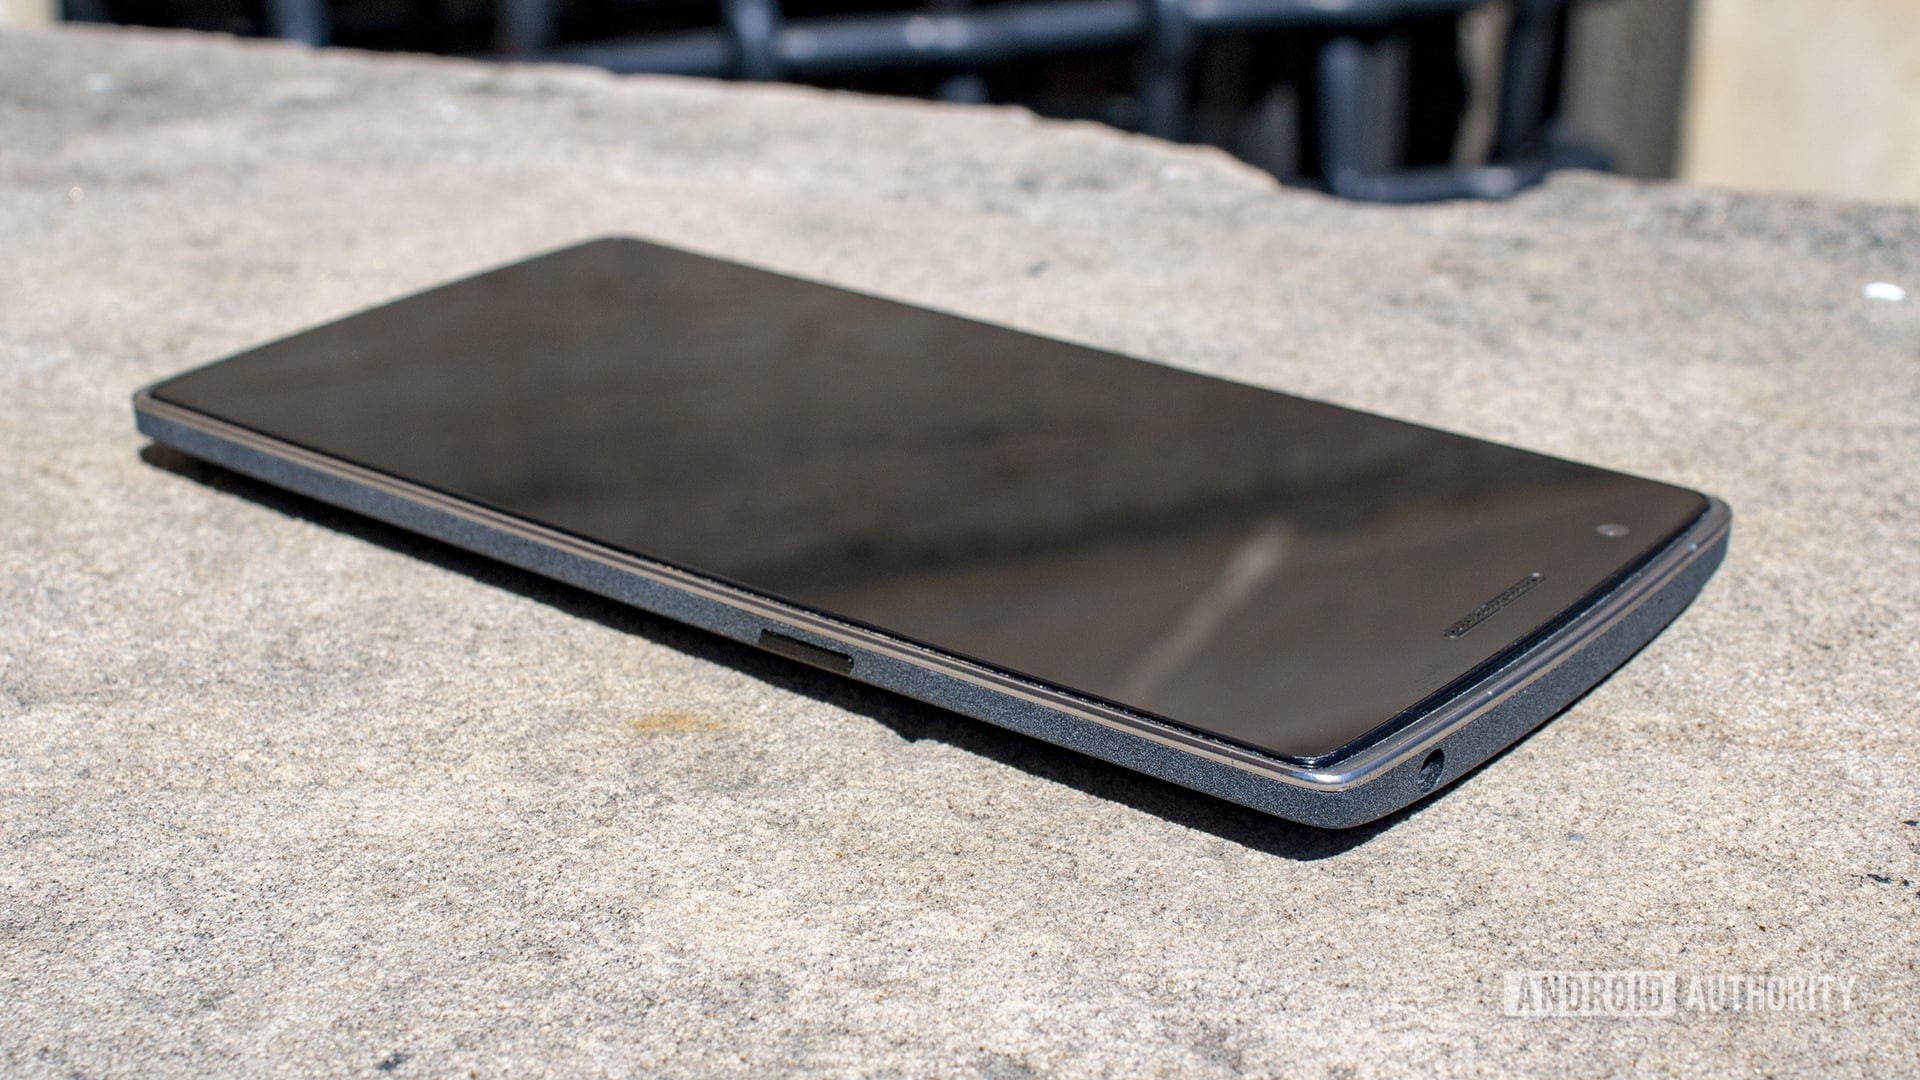 The front and right side of the OnePlus One, showing its headphone jack.